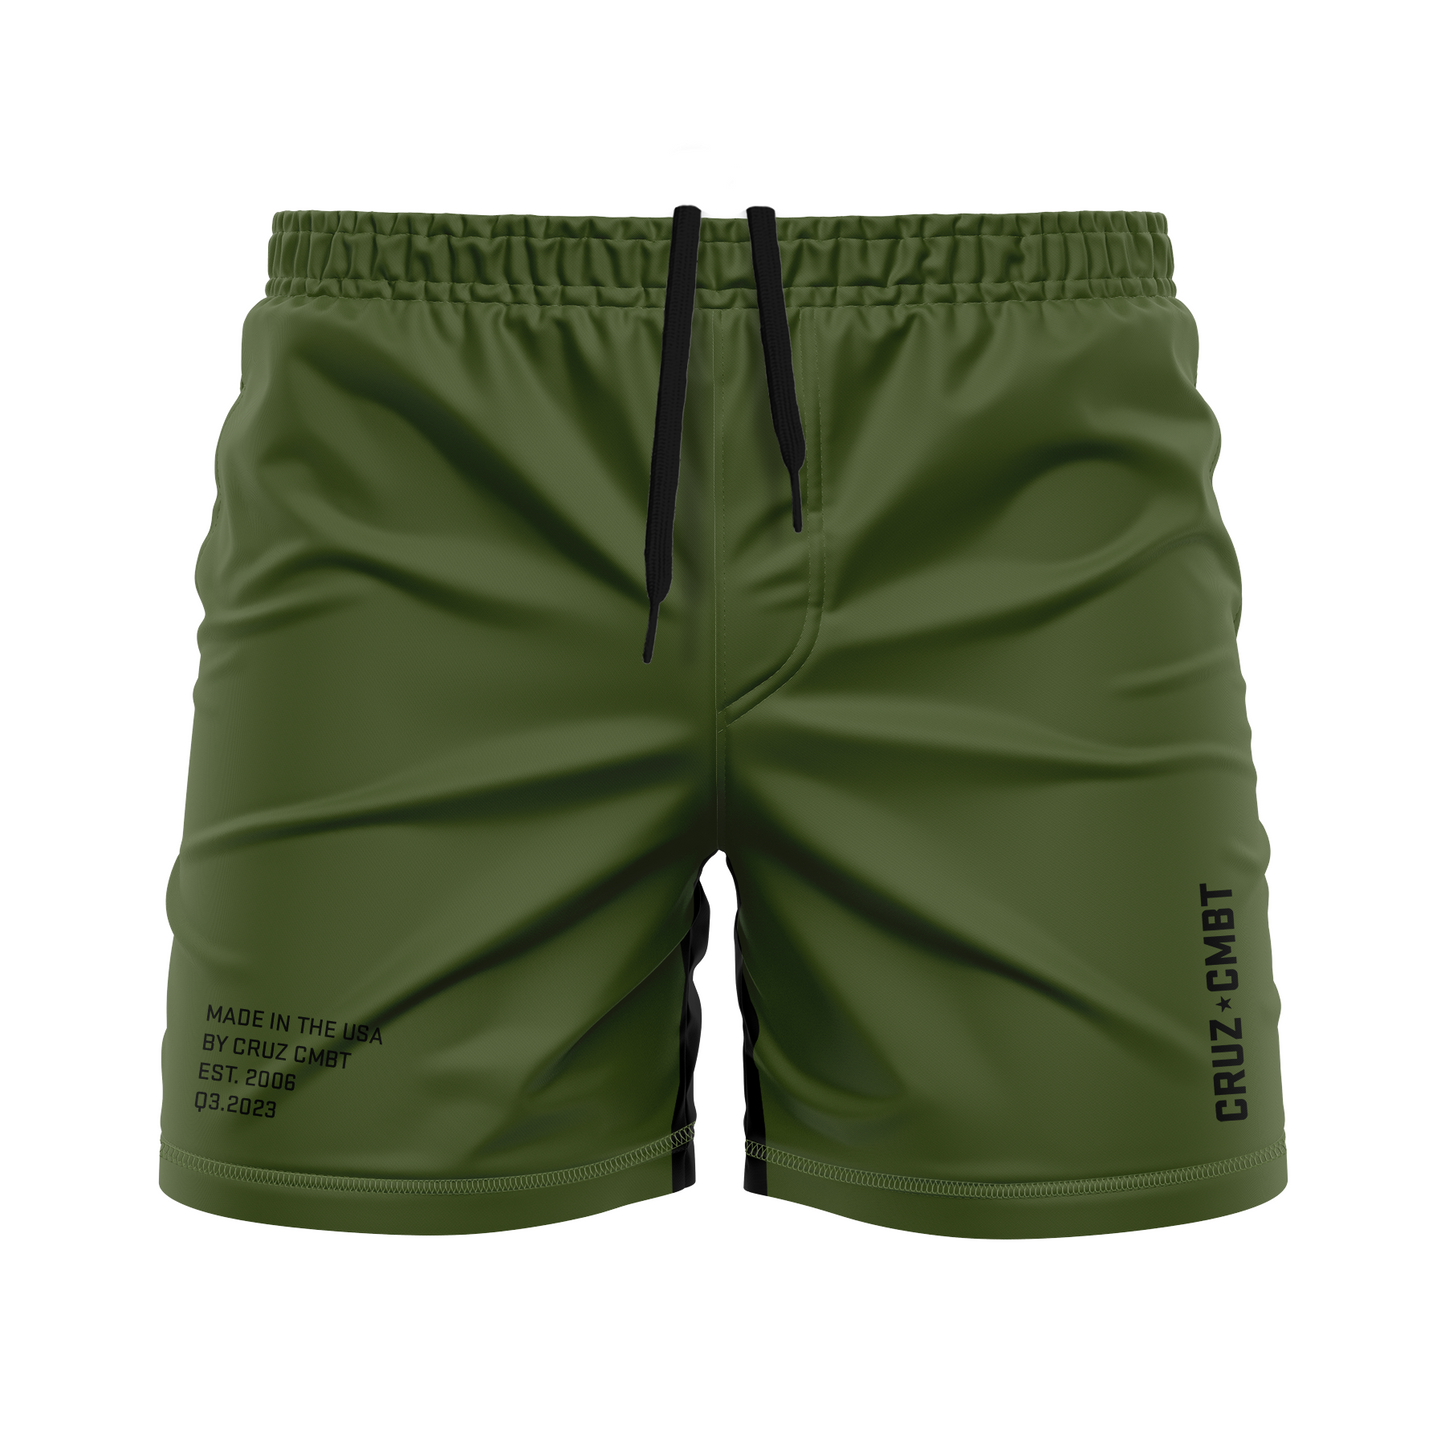 Base Collection men's FC shorts, o.d. and black